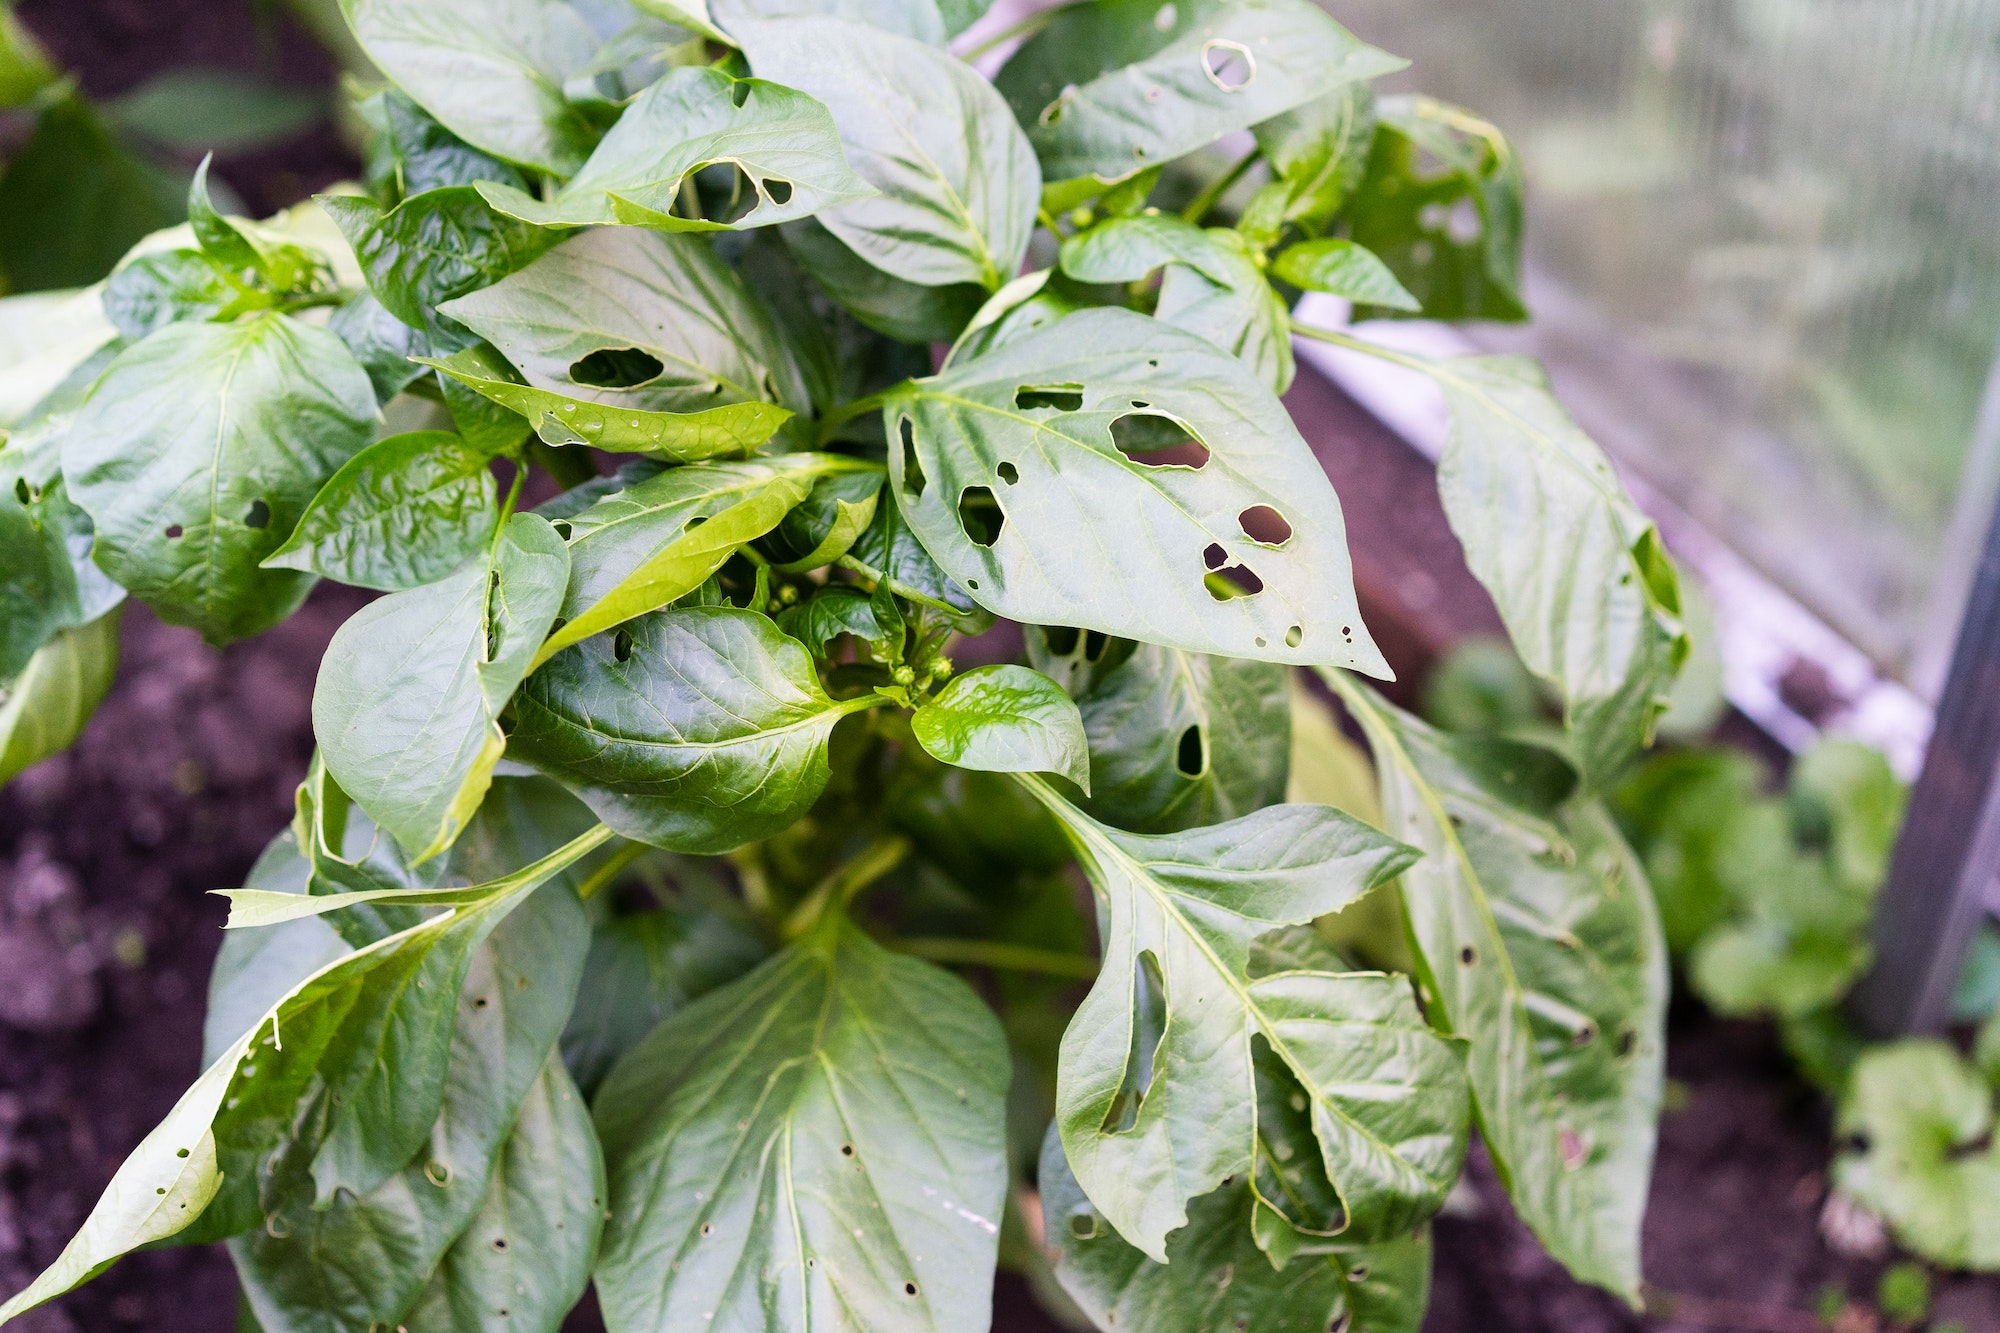 Pest-eaten bell pepper leaves in the greenhouse, pests vegetable tops slugs, pest control